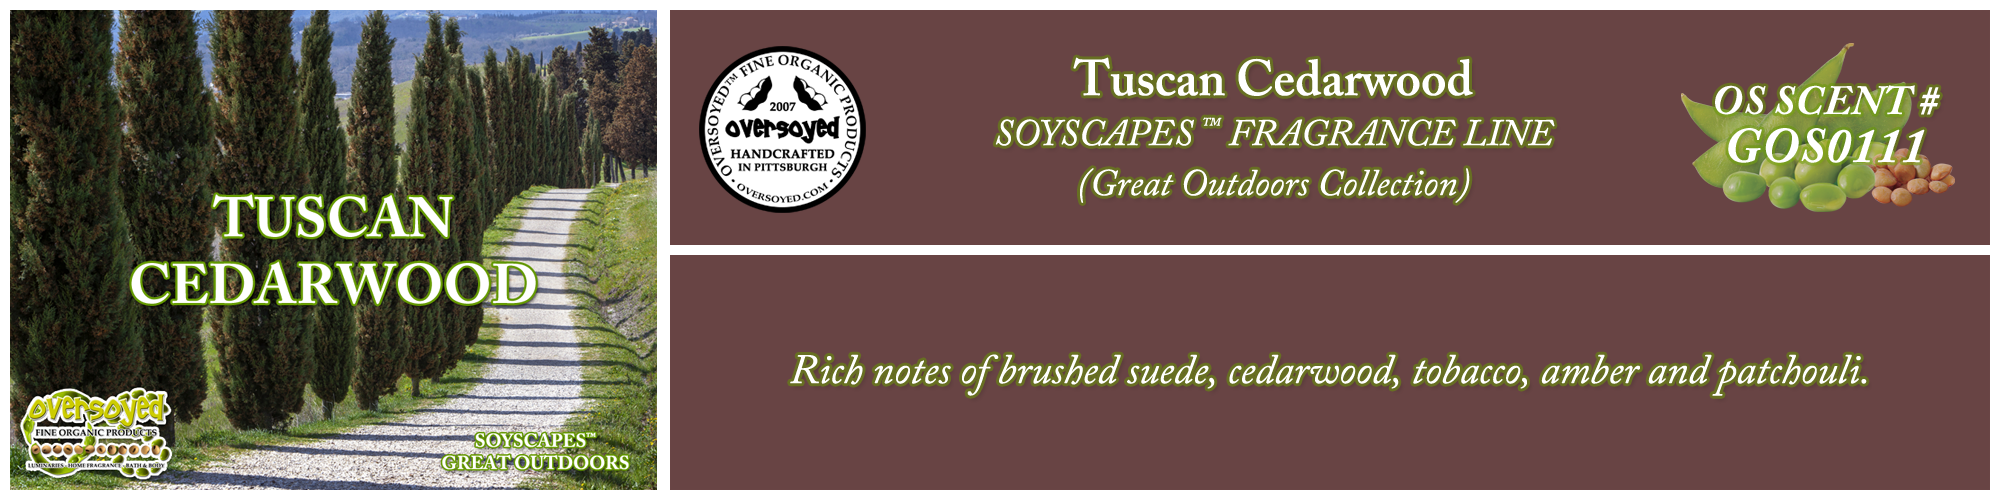 Tuscan Cedarwood Handcrafted Products Collection